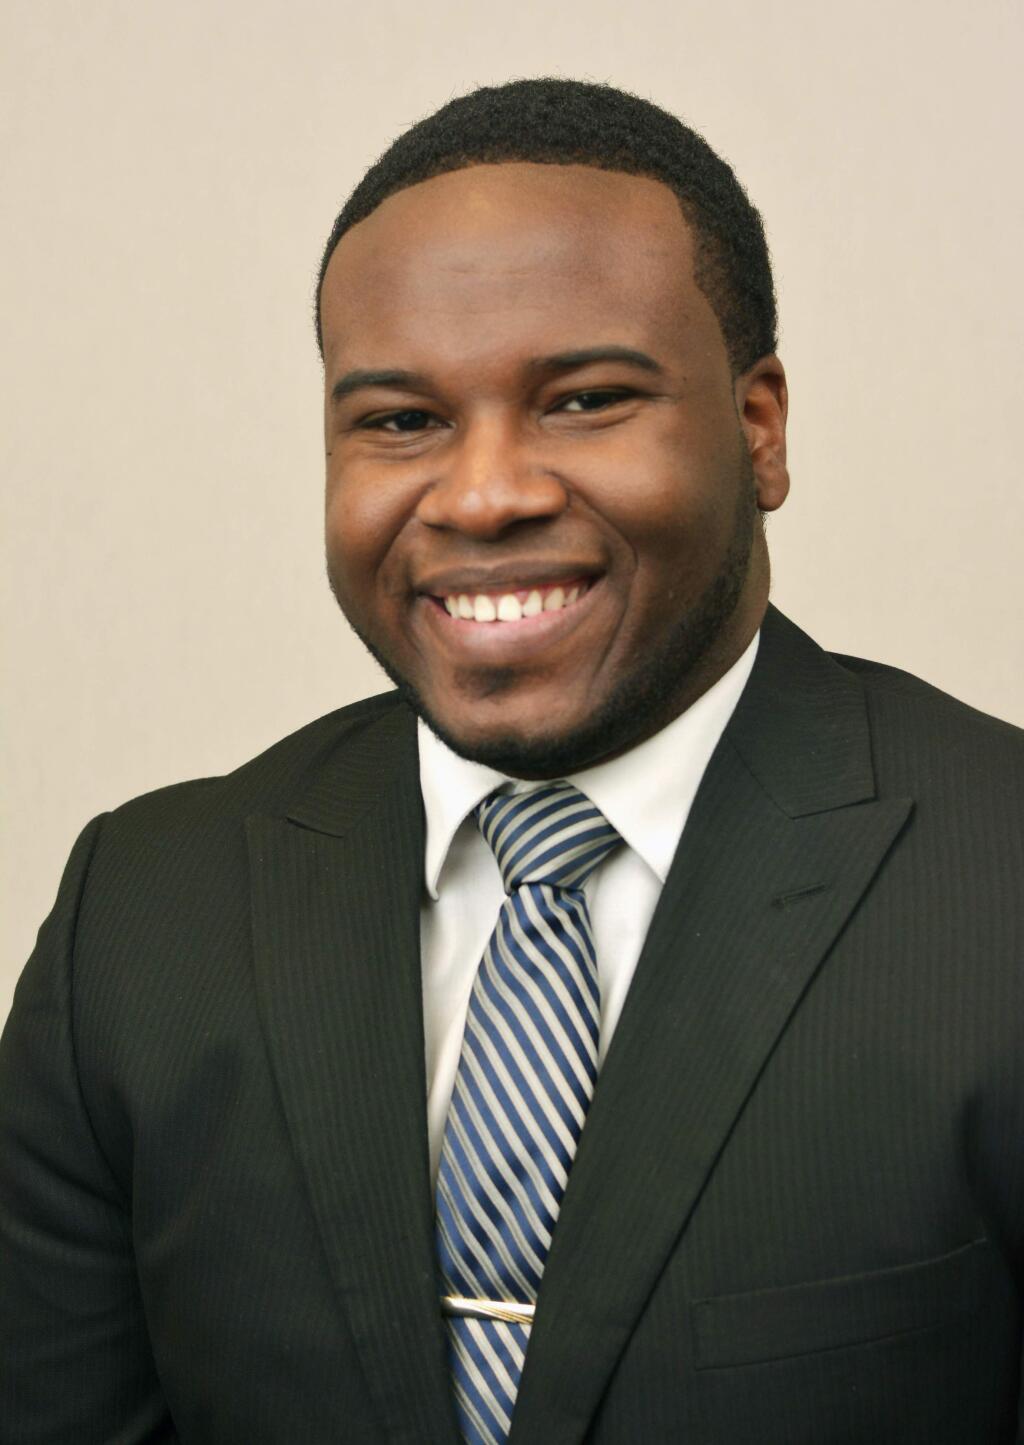 This Feb. 27, 2014, portrait provided by Harding University in Searcy, Ark., shows Botham Jean. Authorities said Friday, Sept. 7, 2018, that a Dallas police officer returning home from work shot and killed Jean, a neighbor, after she said she mistook his apartment for her own. The officer called dispatch to report that she had shot the man Thursday night, police said. (Jeff Montgomery/Harding University via AP)